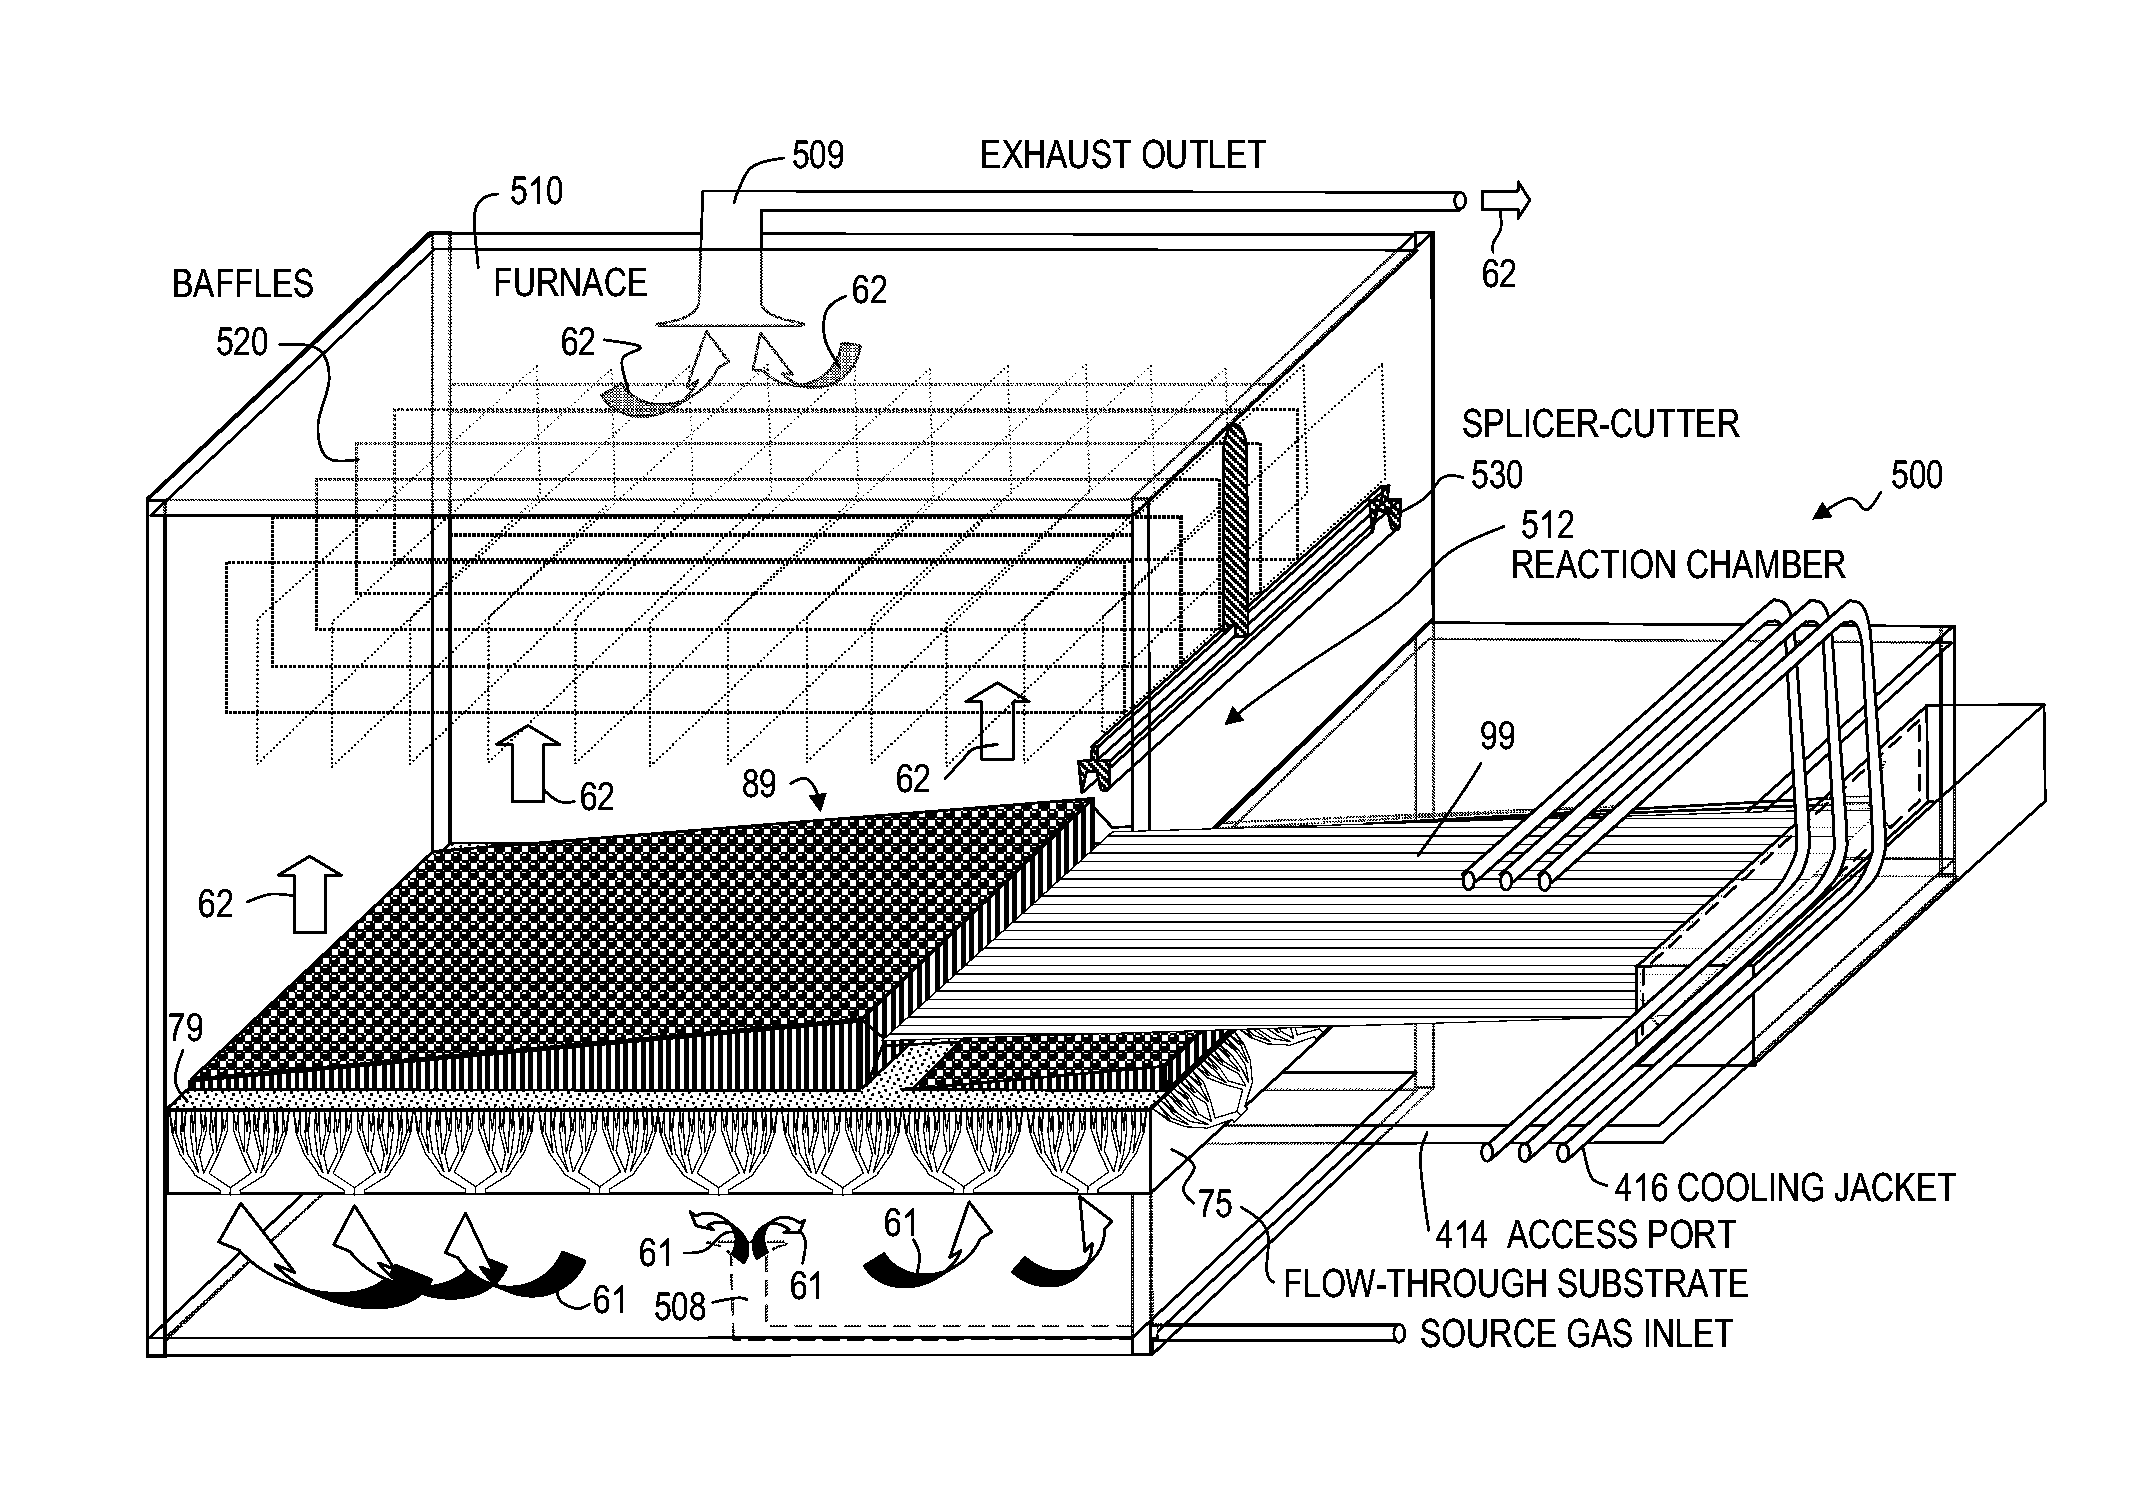 Apparatus and method for growing fullerene nanotube forests, and forming nanotube films, threads and composite structures therefrom